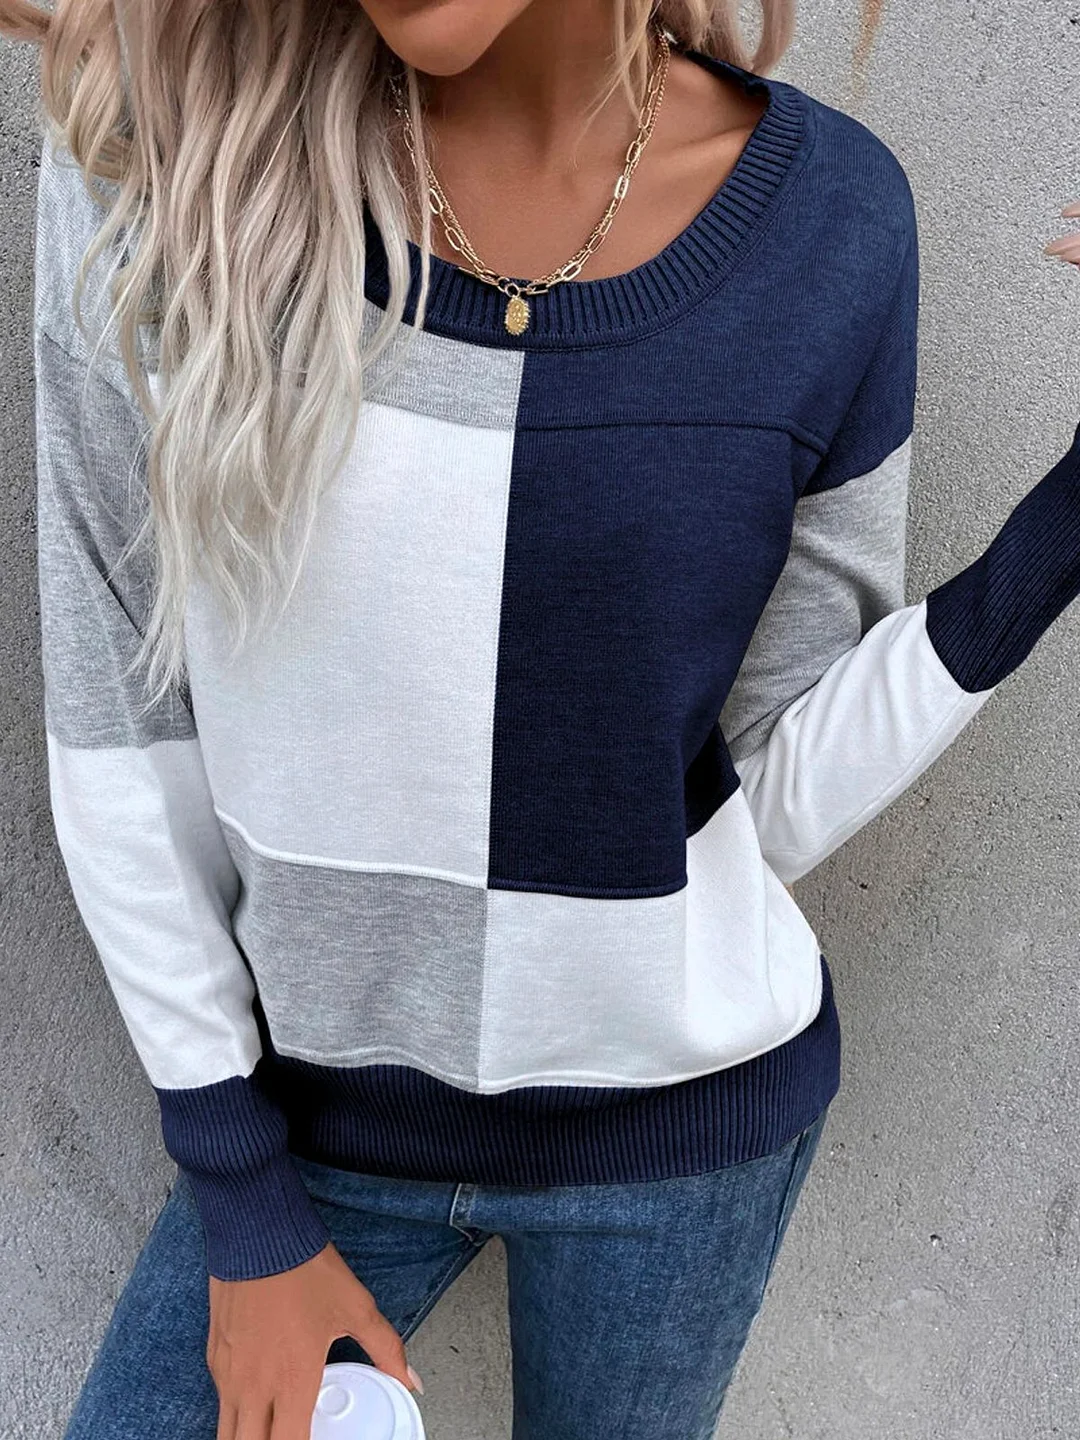 Crew Neck Casual Loose Sweater | IFYHOME